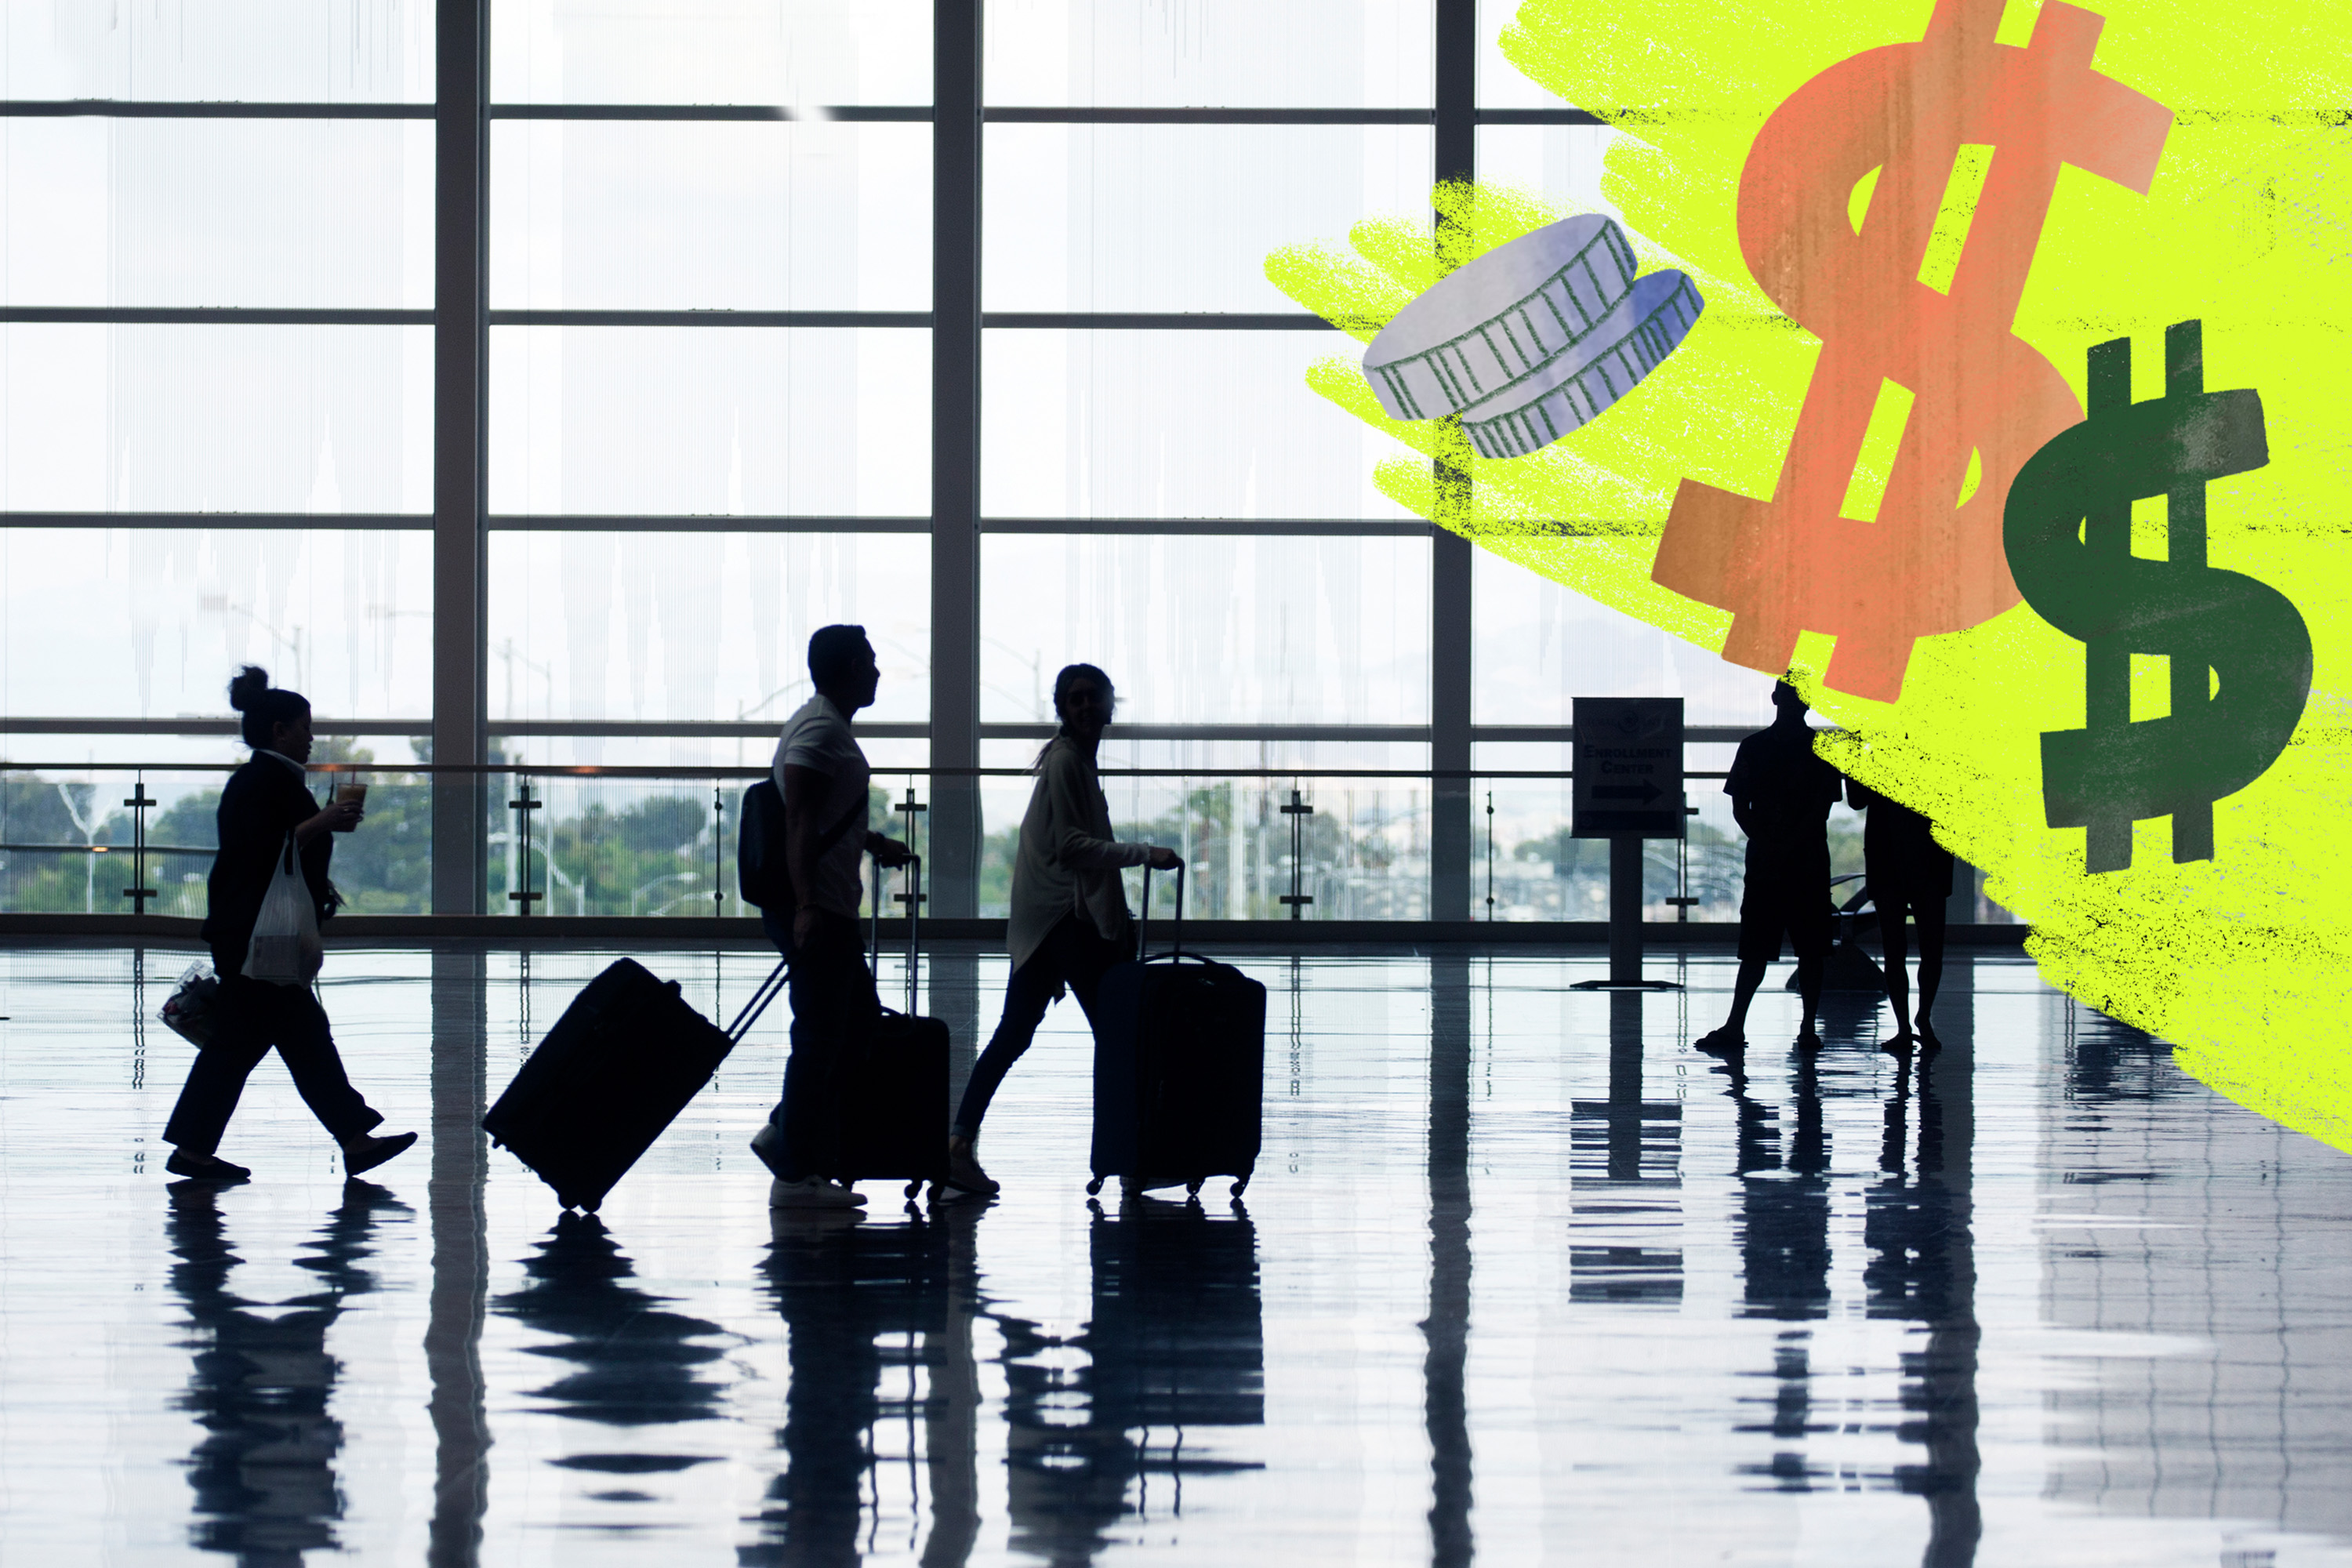 A photo illustration of people in an airport with dollar signs superimposed.